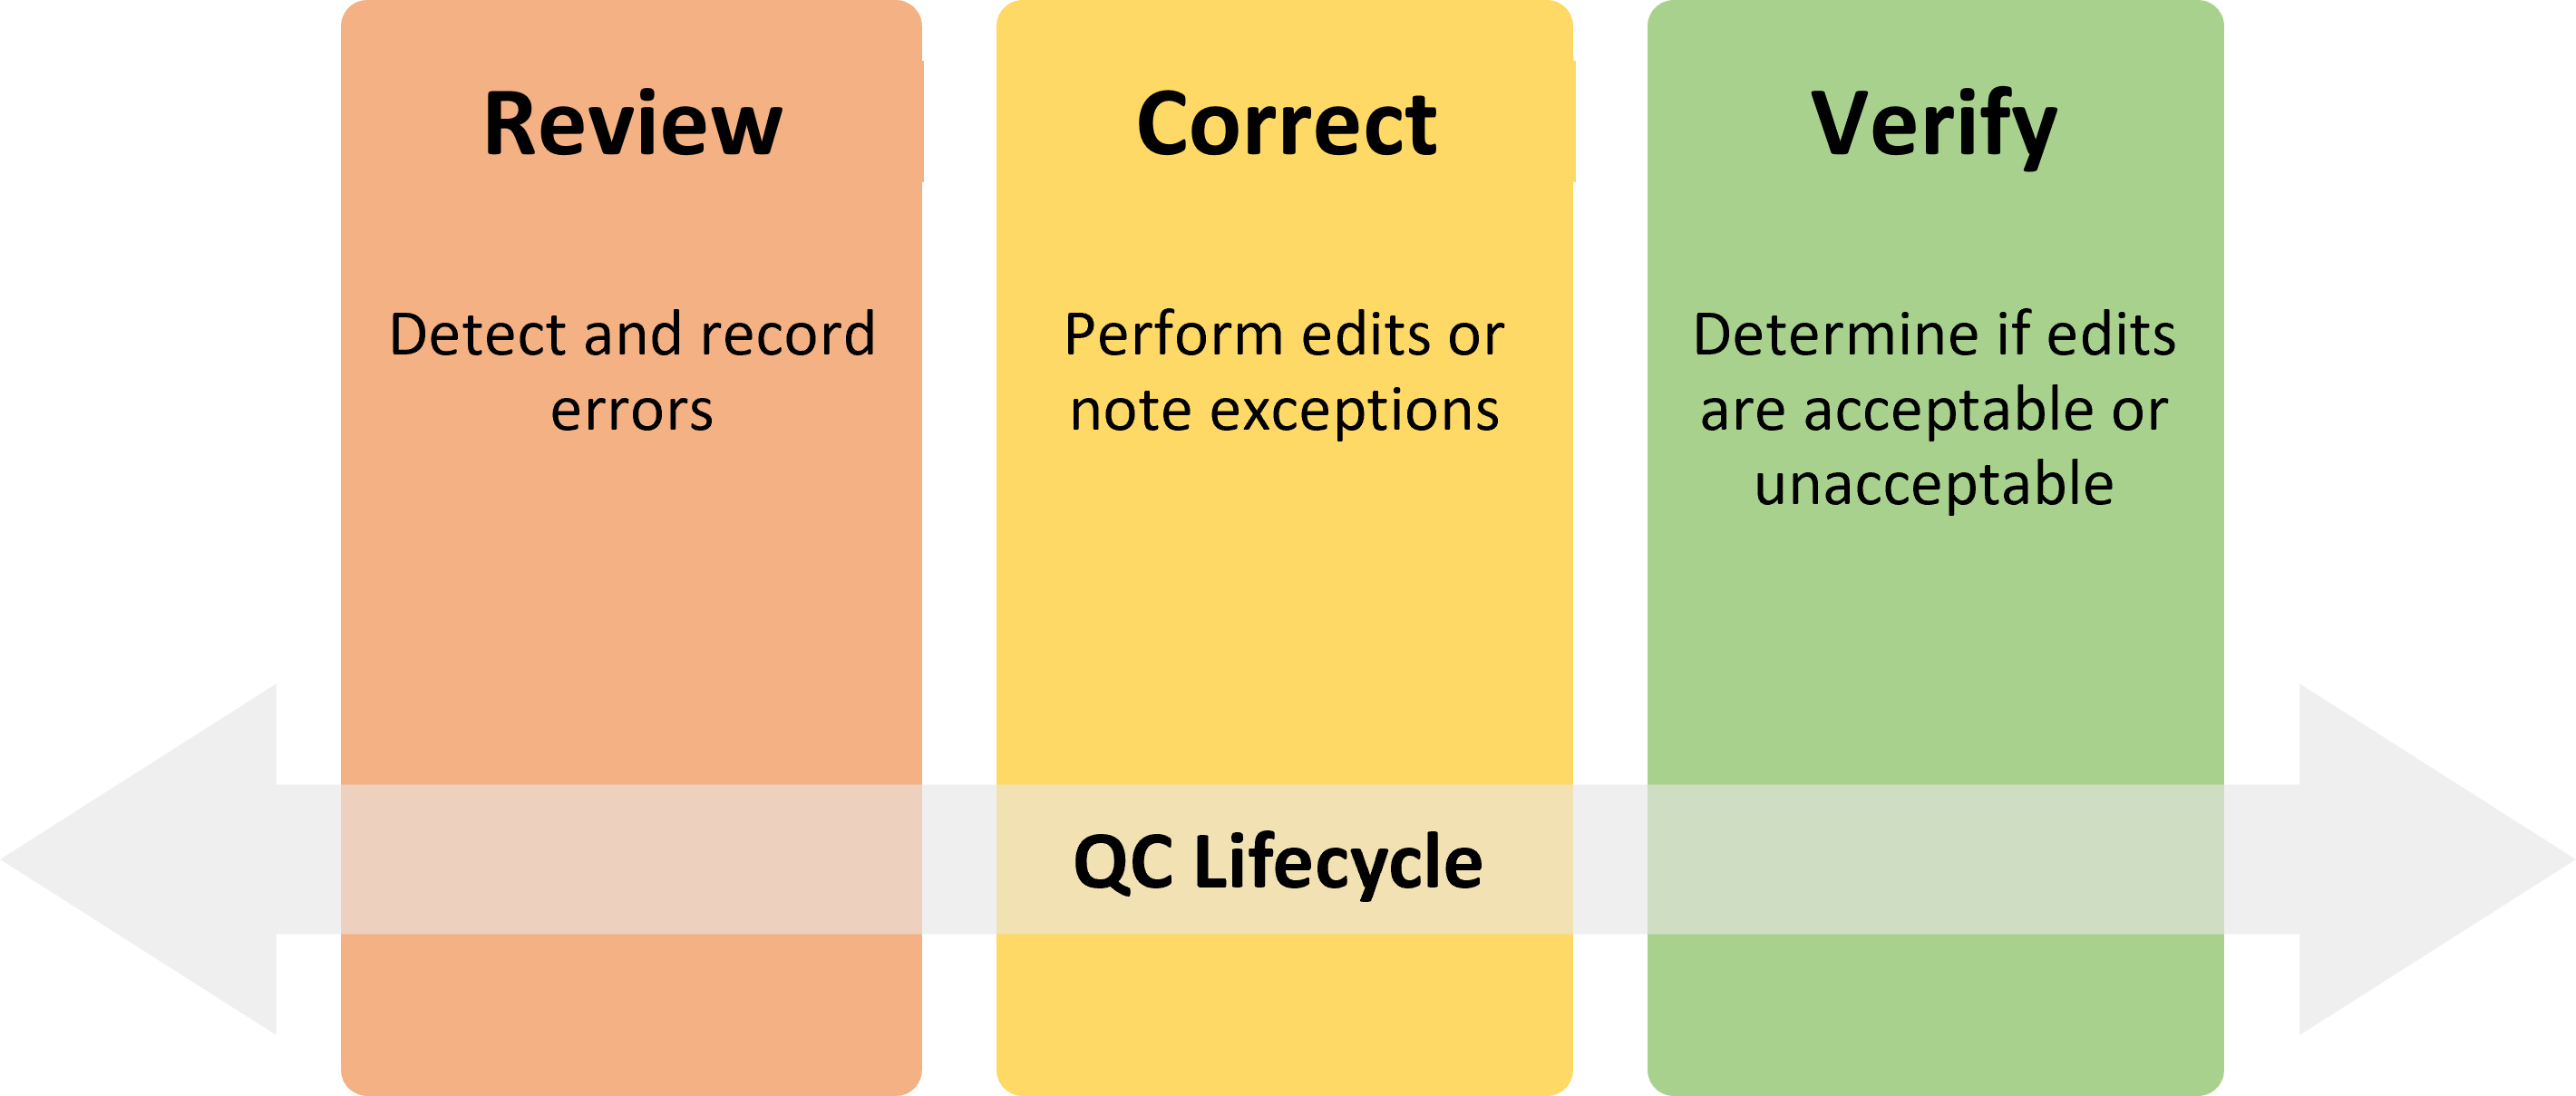 Data Reviewer three-phase error life cycle (Review, Correct, Verify)